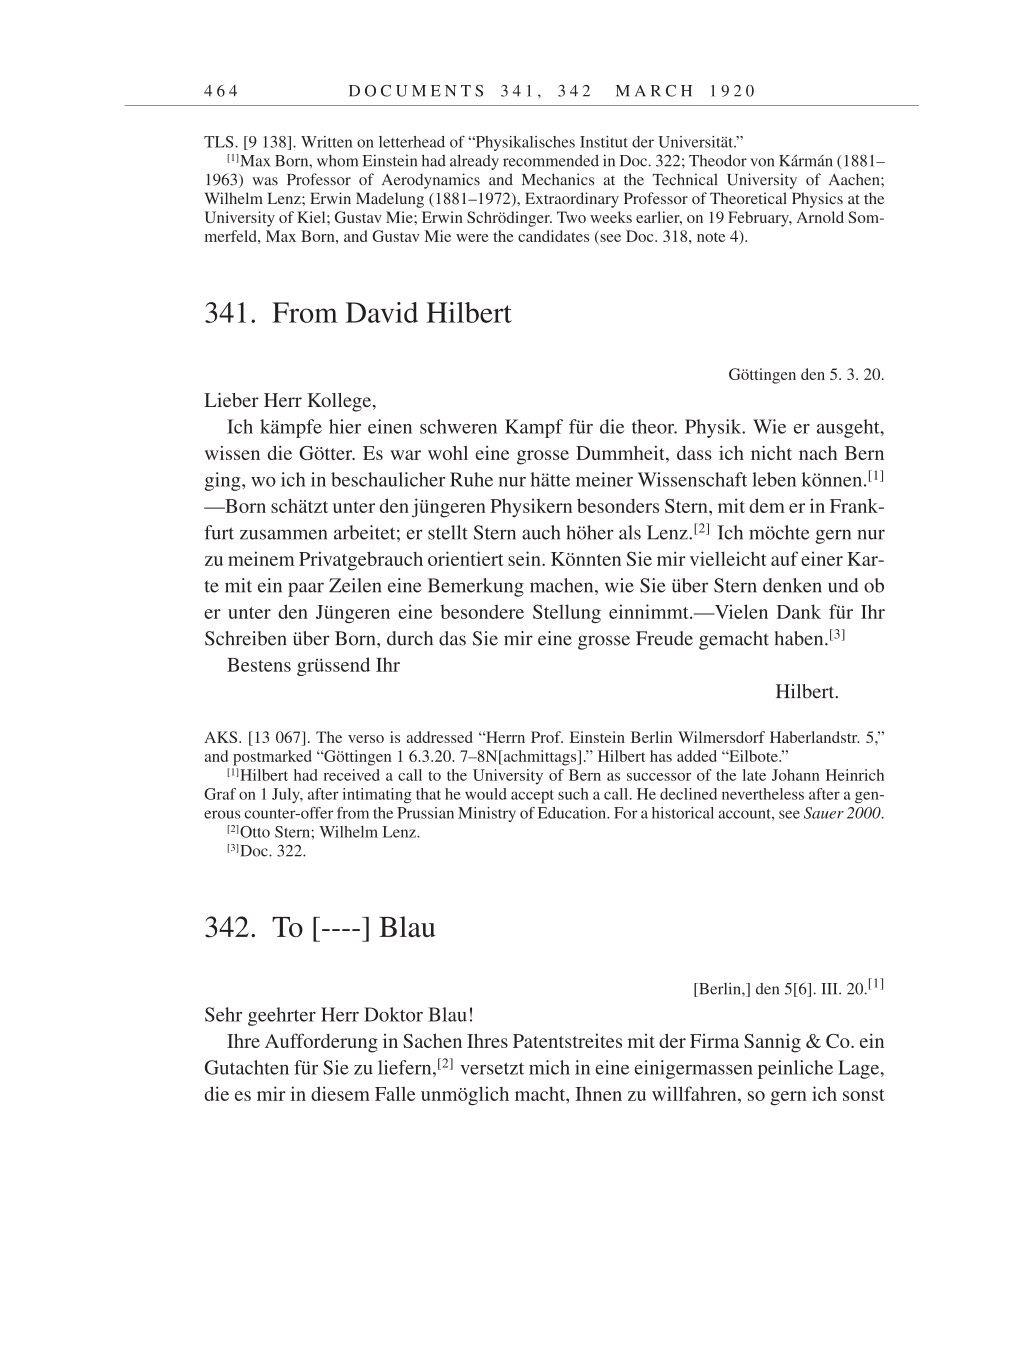 Volume 9: The Berlin Years: Correspondence January 1919-April 1920 page 464